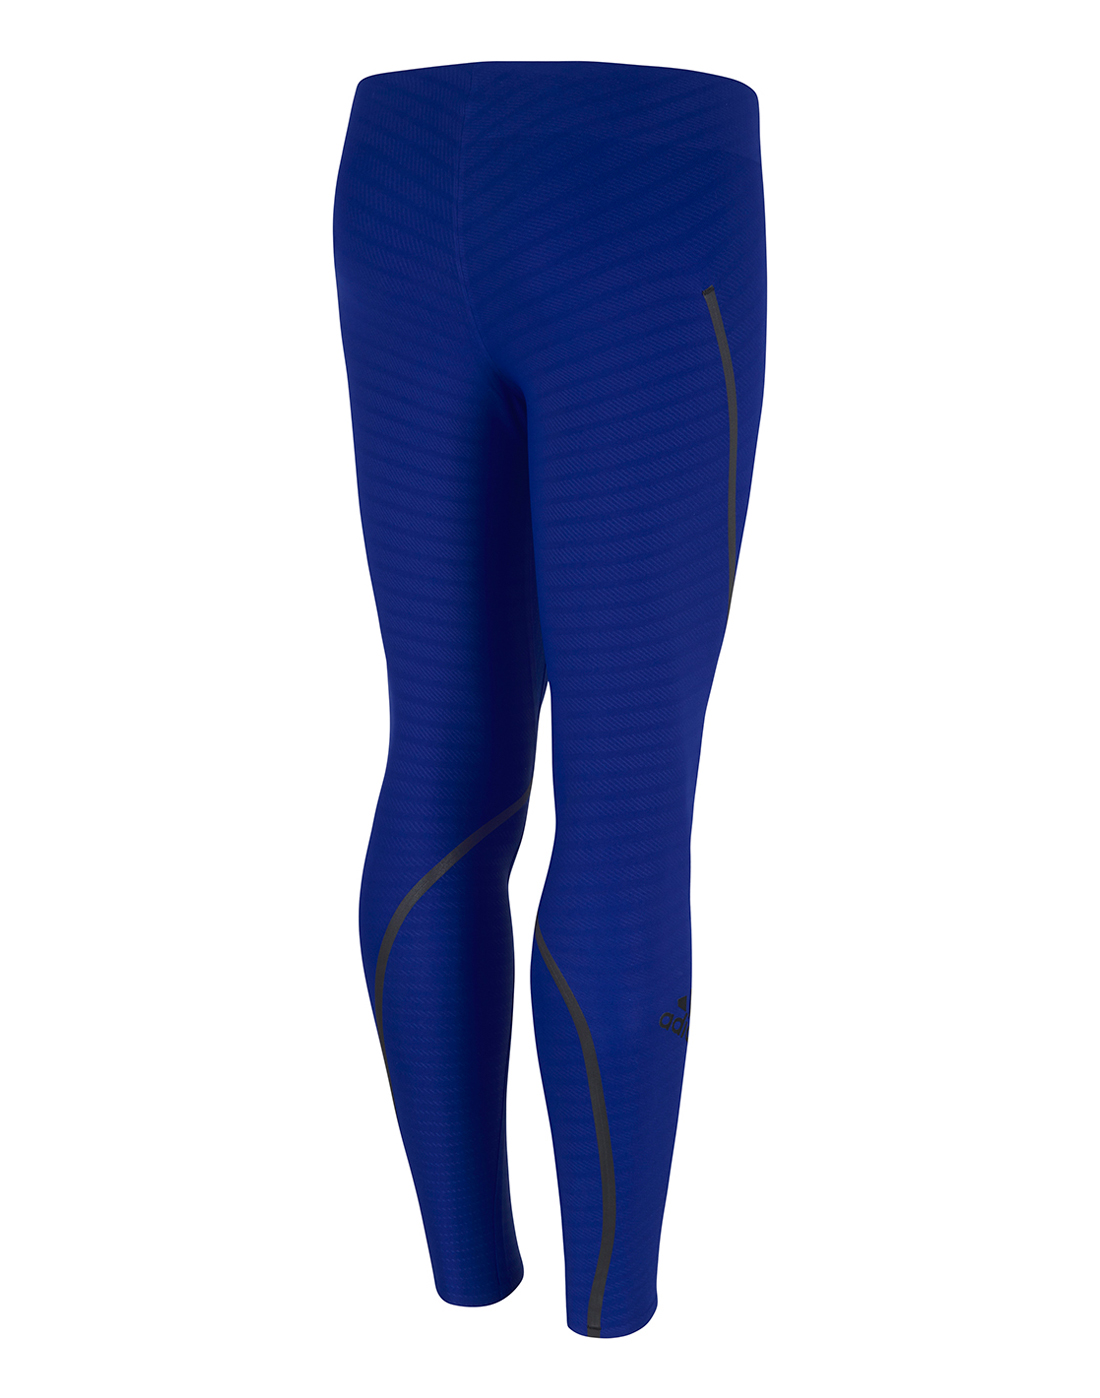 adidas alphaskin 360 tights review